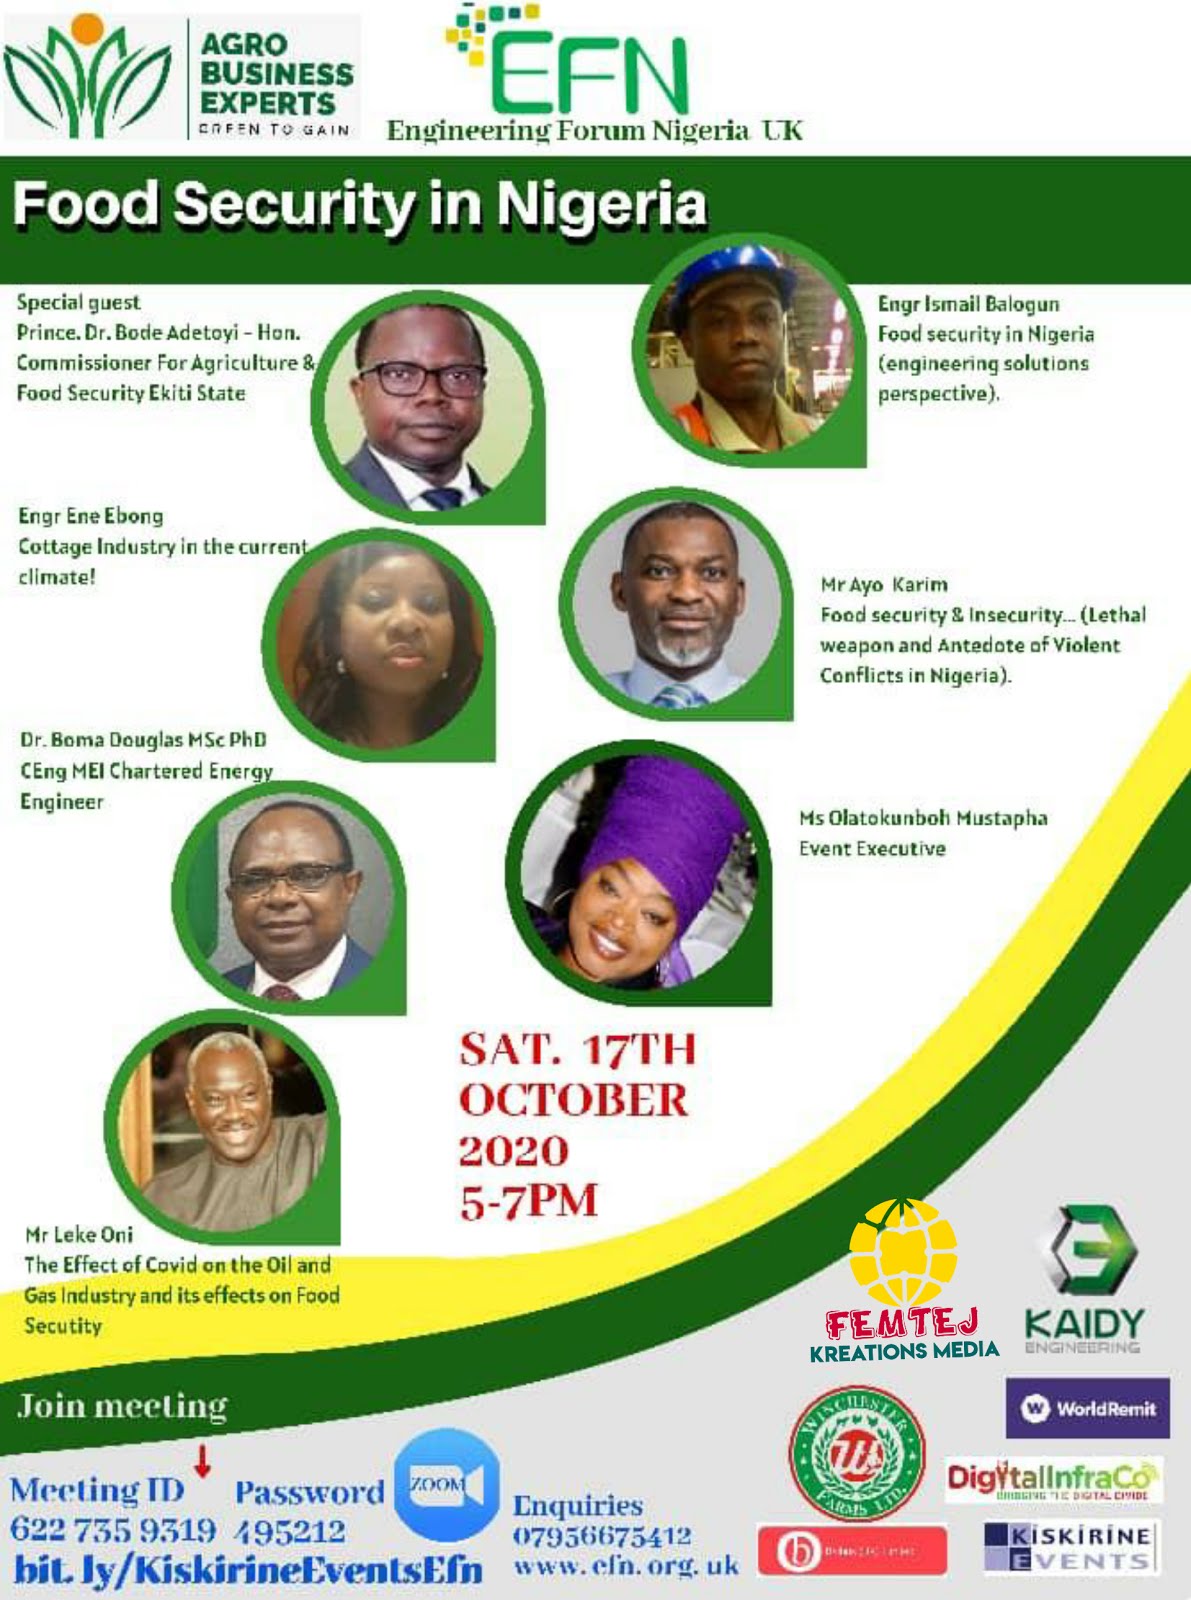 Sat/17/Oct: Agro Business Experts & Engineering Forum Nigeria Online Conference